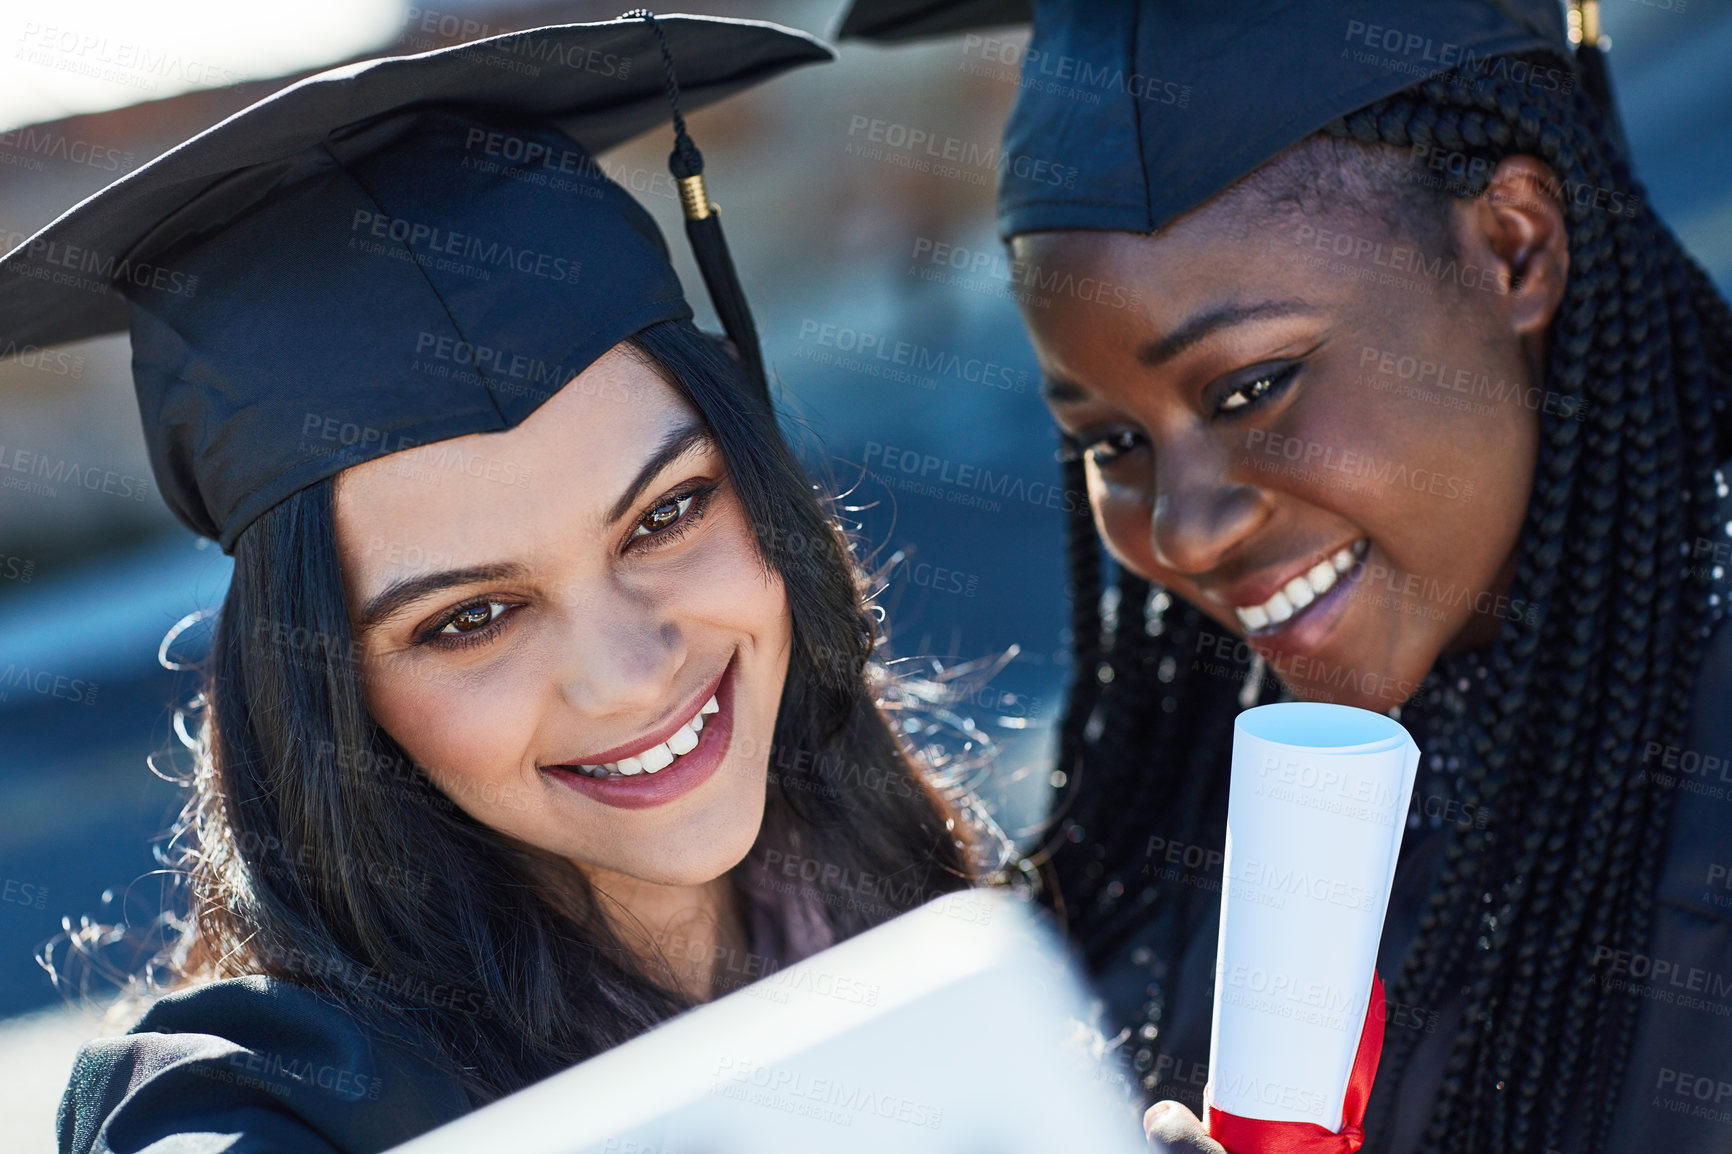 Buy stock photo Shot of two students taking a selfie together on graduation day